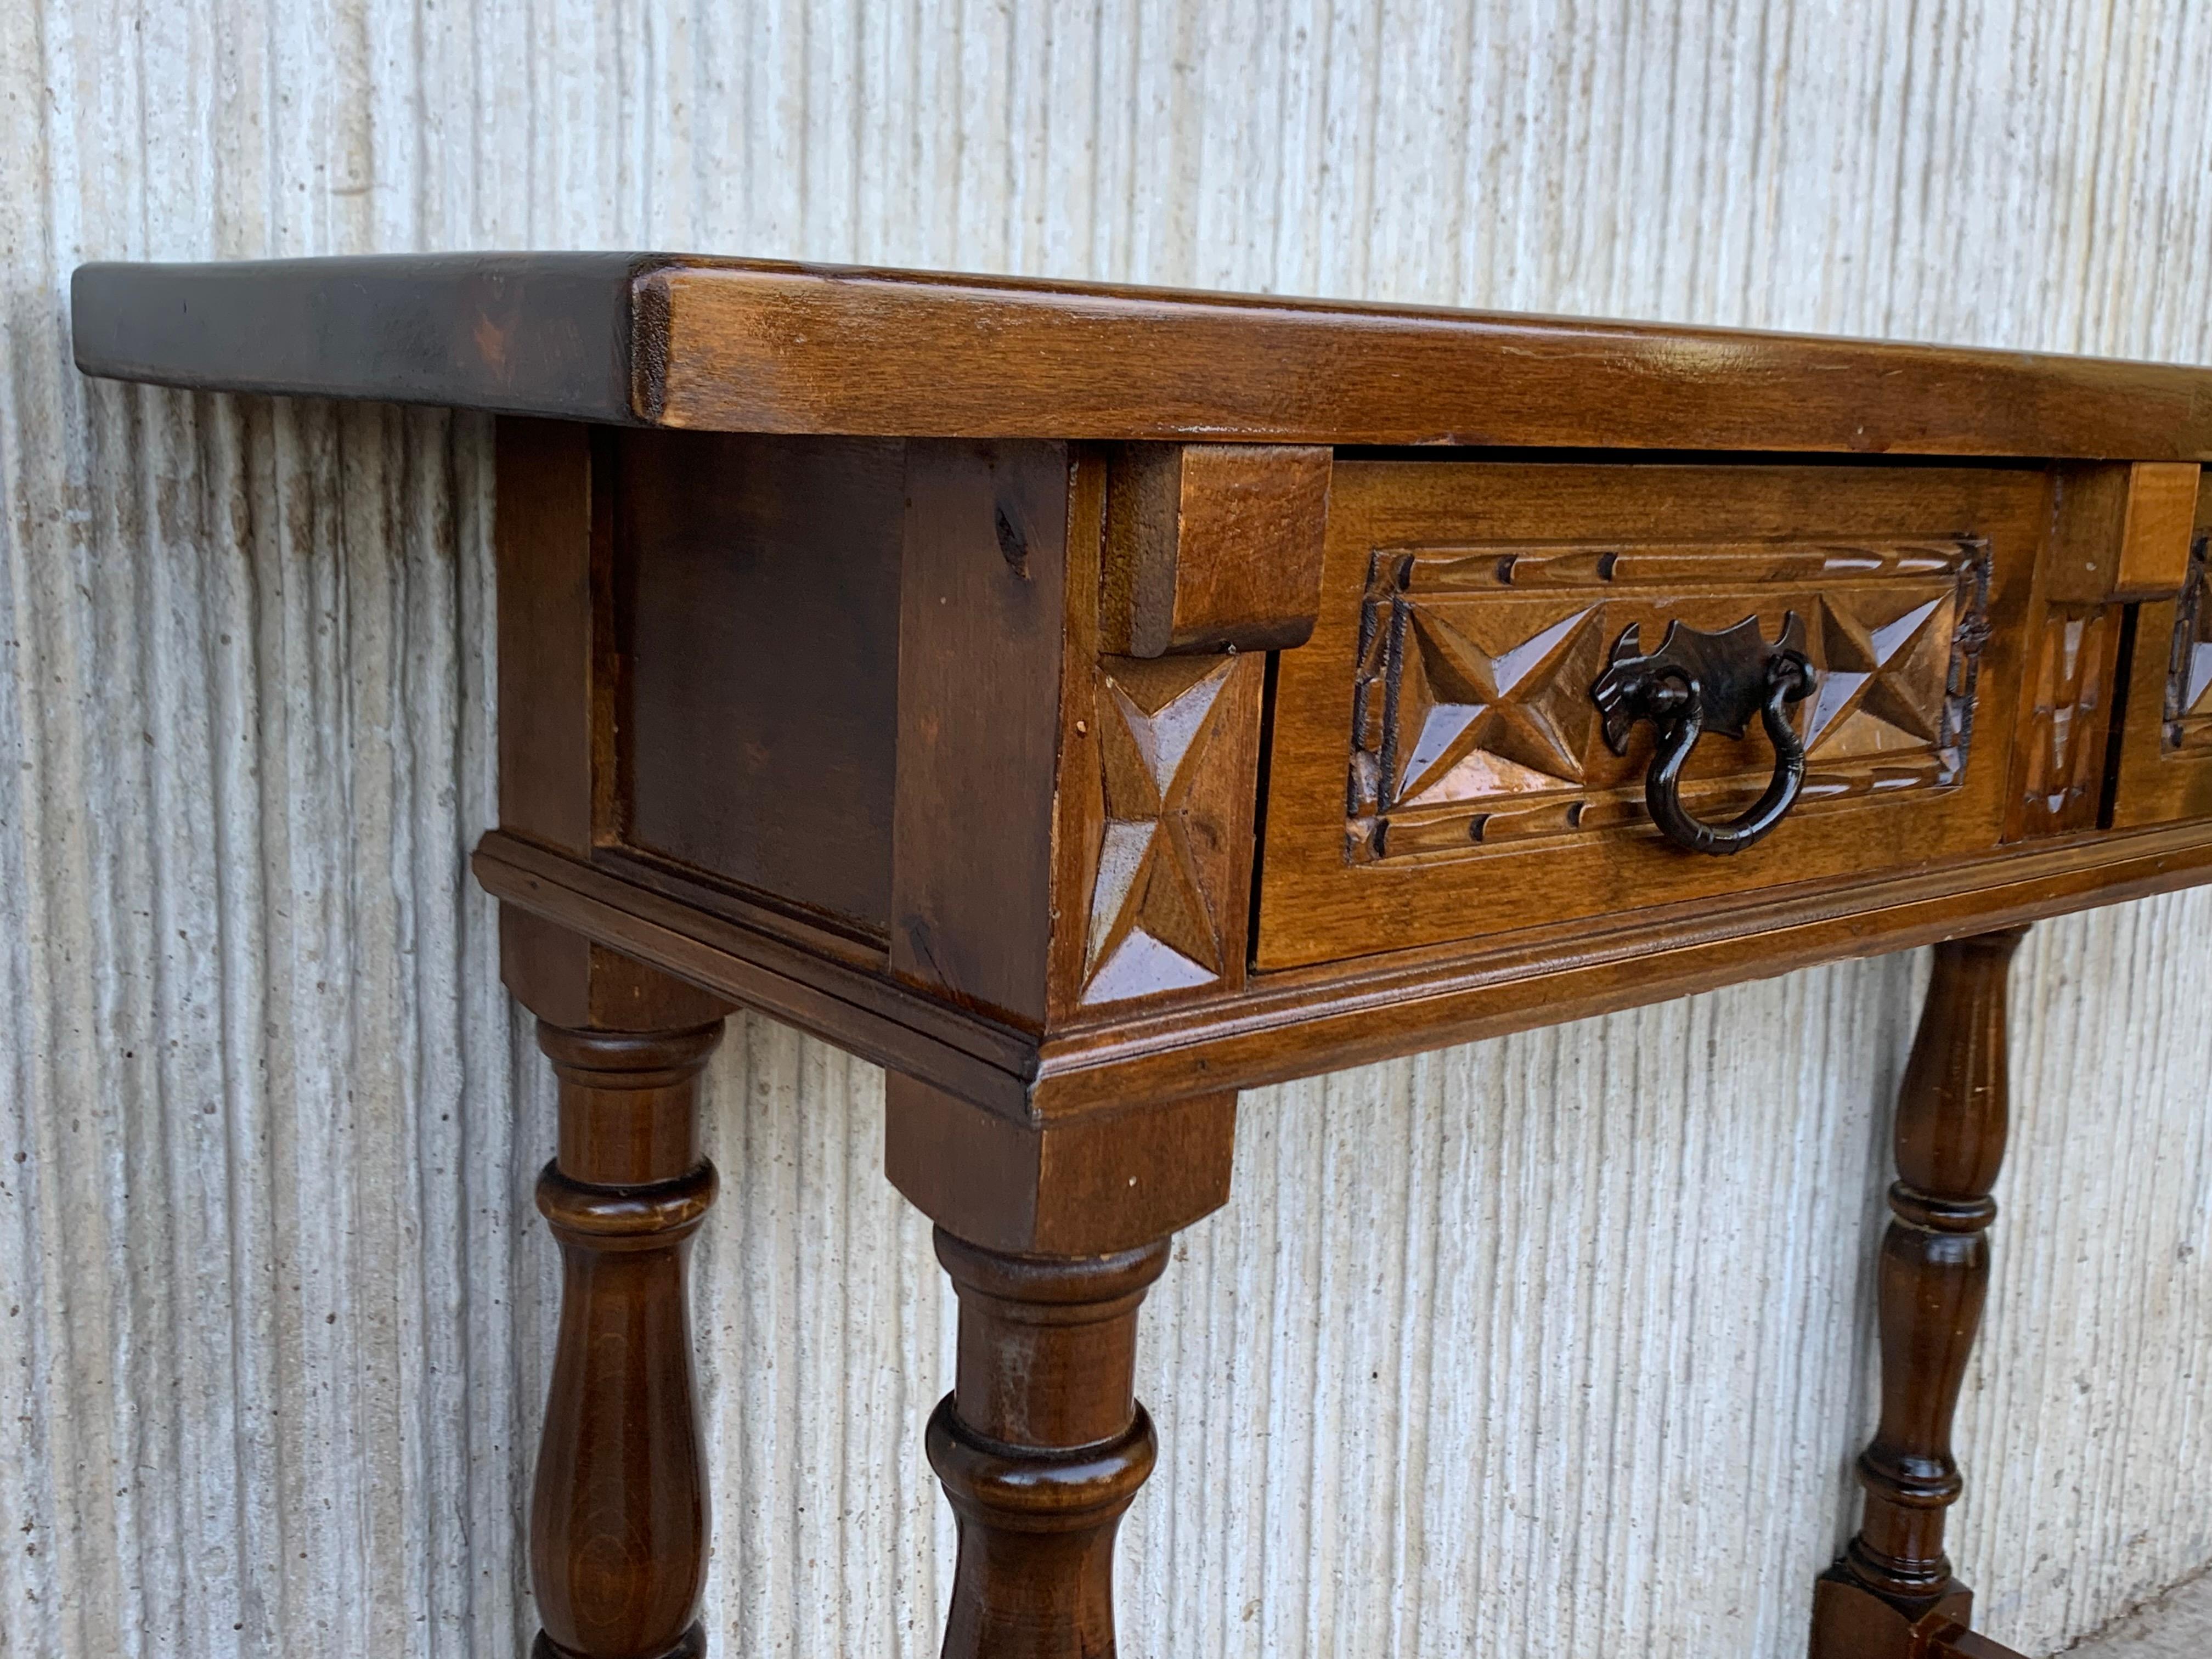 Iron 20th Century Spanish Tuscan Console Table with Two Drawers and Turned Legs For Sale